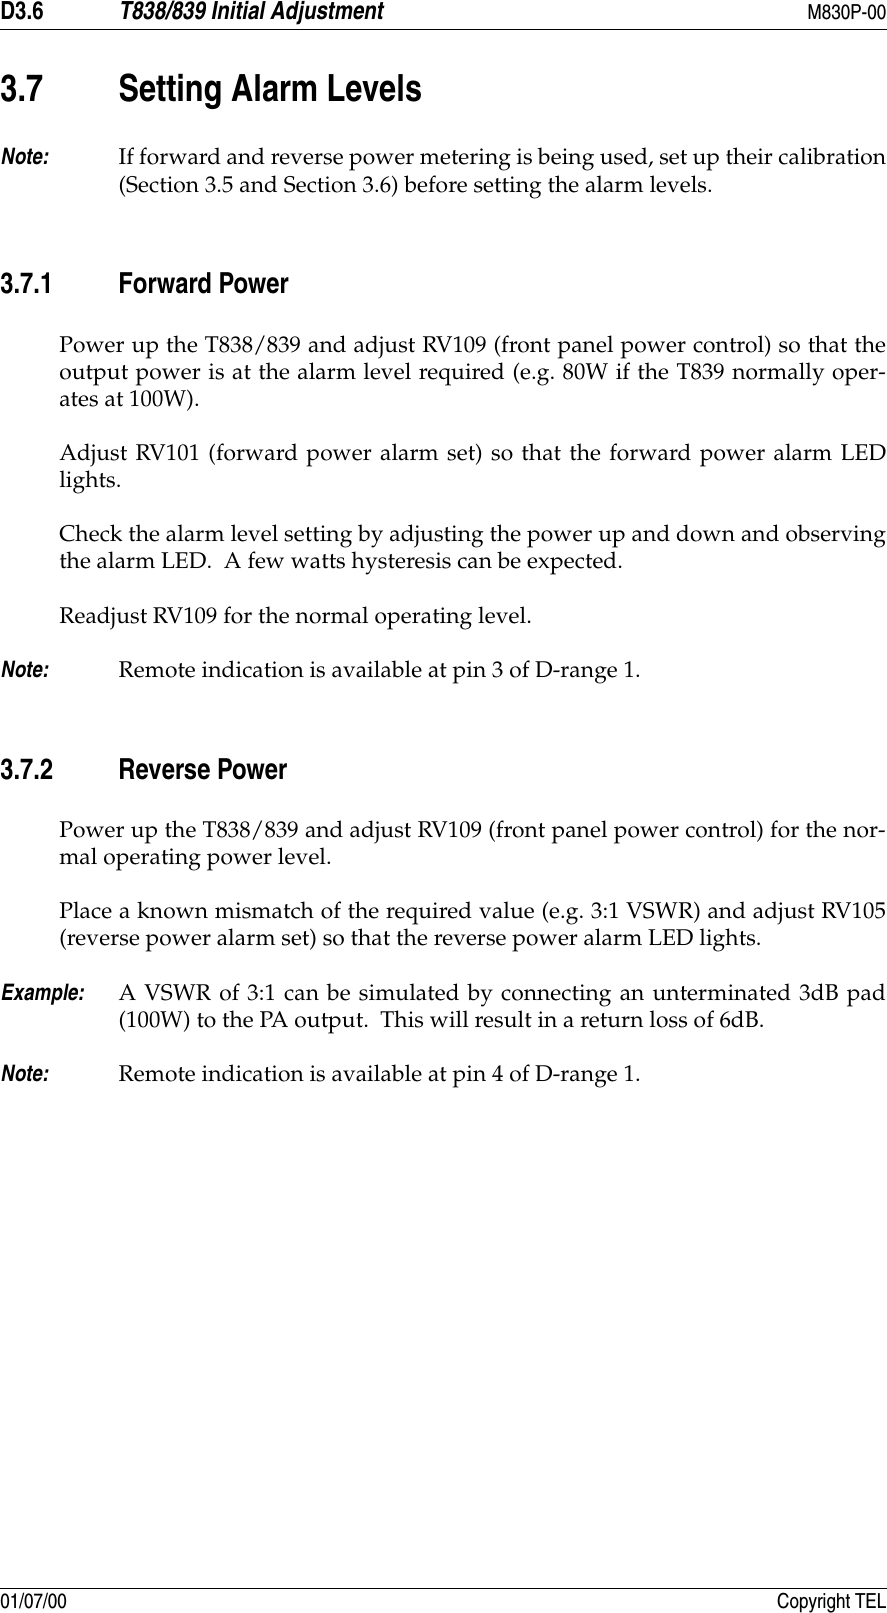 D3.6 T838/839 Initial Adjustment M830P-0001/07/00 Copyright TEL3.7 Setting Alarm LevelsNote: If forward and reverse power metering is being used, set up their calibration(Section 3.5 and Section 3.6) before setting the alarm levels.3.7.1 Forward PowerPower up the T838/839 and adjust RV109 (front panel power control) so that theoutput power is at the alarm level required (e.g. 80W if the T839 normally oper-ates at 100W).Adjust RV101 (forward power alarm set) so that the forward power alarm LEDlights.Check the alarm level setting by adjusting the power up and down and observingthe alarm LED.  A few watts hysteresis can be expected.Readjust RV109 for the normal operating level.Note: Remote indication is available at pin 3 of D-range 1.3.7.2 Reverse PowerPower up the T838/839 and adjust RV109 (front panel power control) for the nor-mal operating power level.Place a known mismatch of the required value (e.g. 3:1 VSWR) and adjust RV105(reverse power alarm set) so that the reverse power alarm LED lights.Example: A VSWR of 3:1 can be simulated by connecting an unterminated 3dB pad(100W) to the PA output.  This will result in a return loss of 6dB.Note: Remote indication is available at pin 4 of D-range 1.